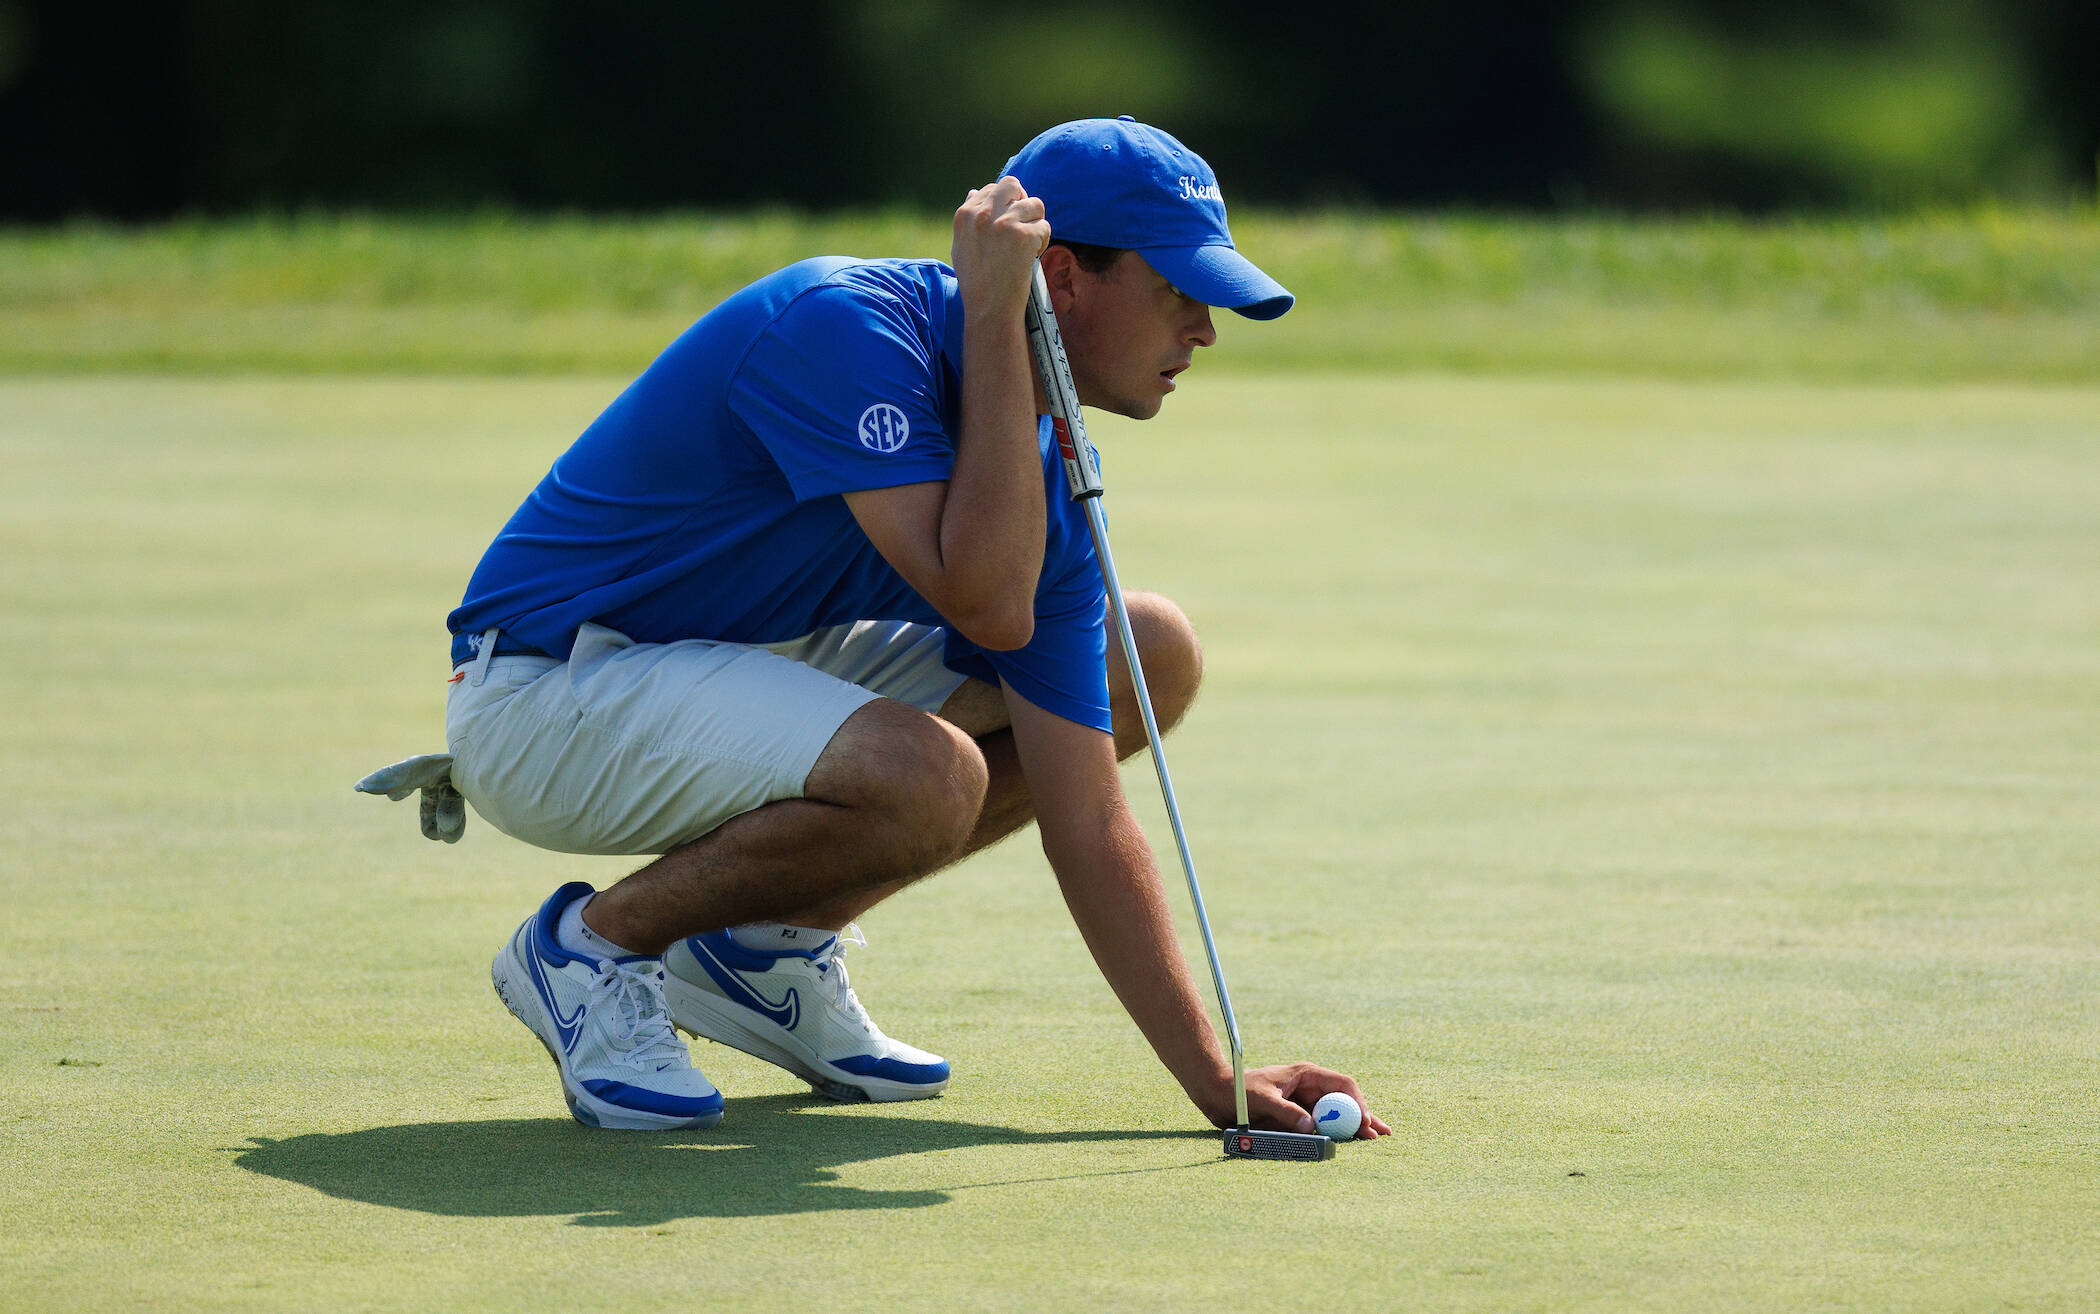 Cats Finish Fifth, Alex Goff Ties for Third at Schenkel Invitational